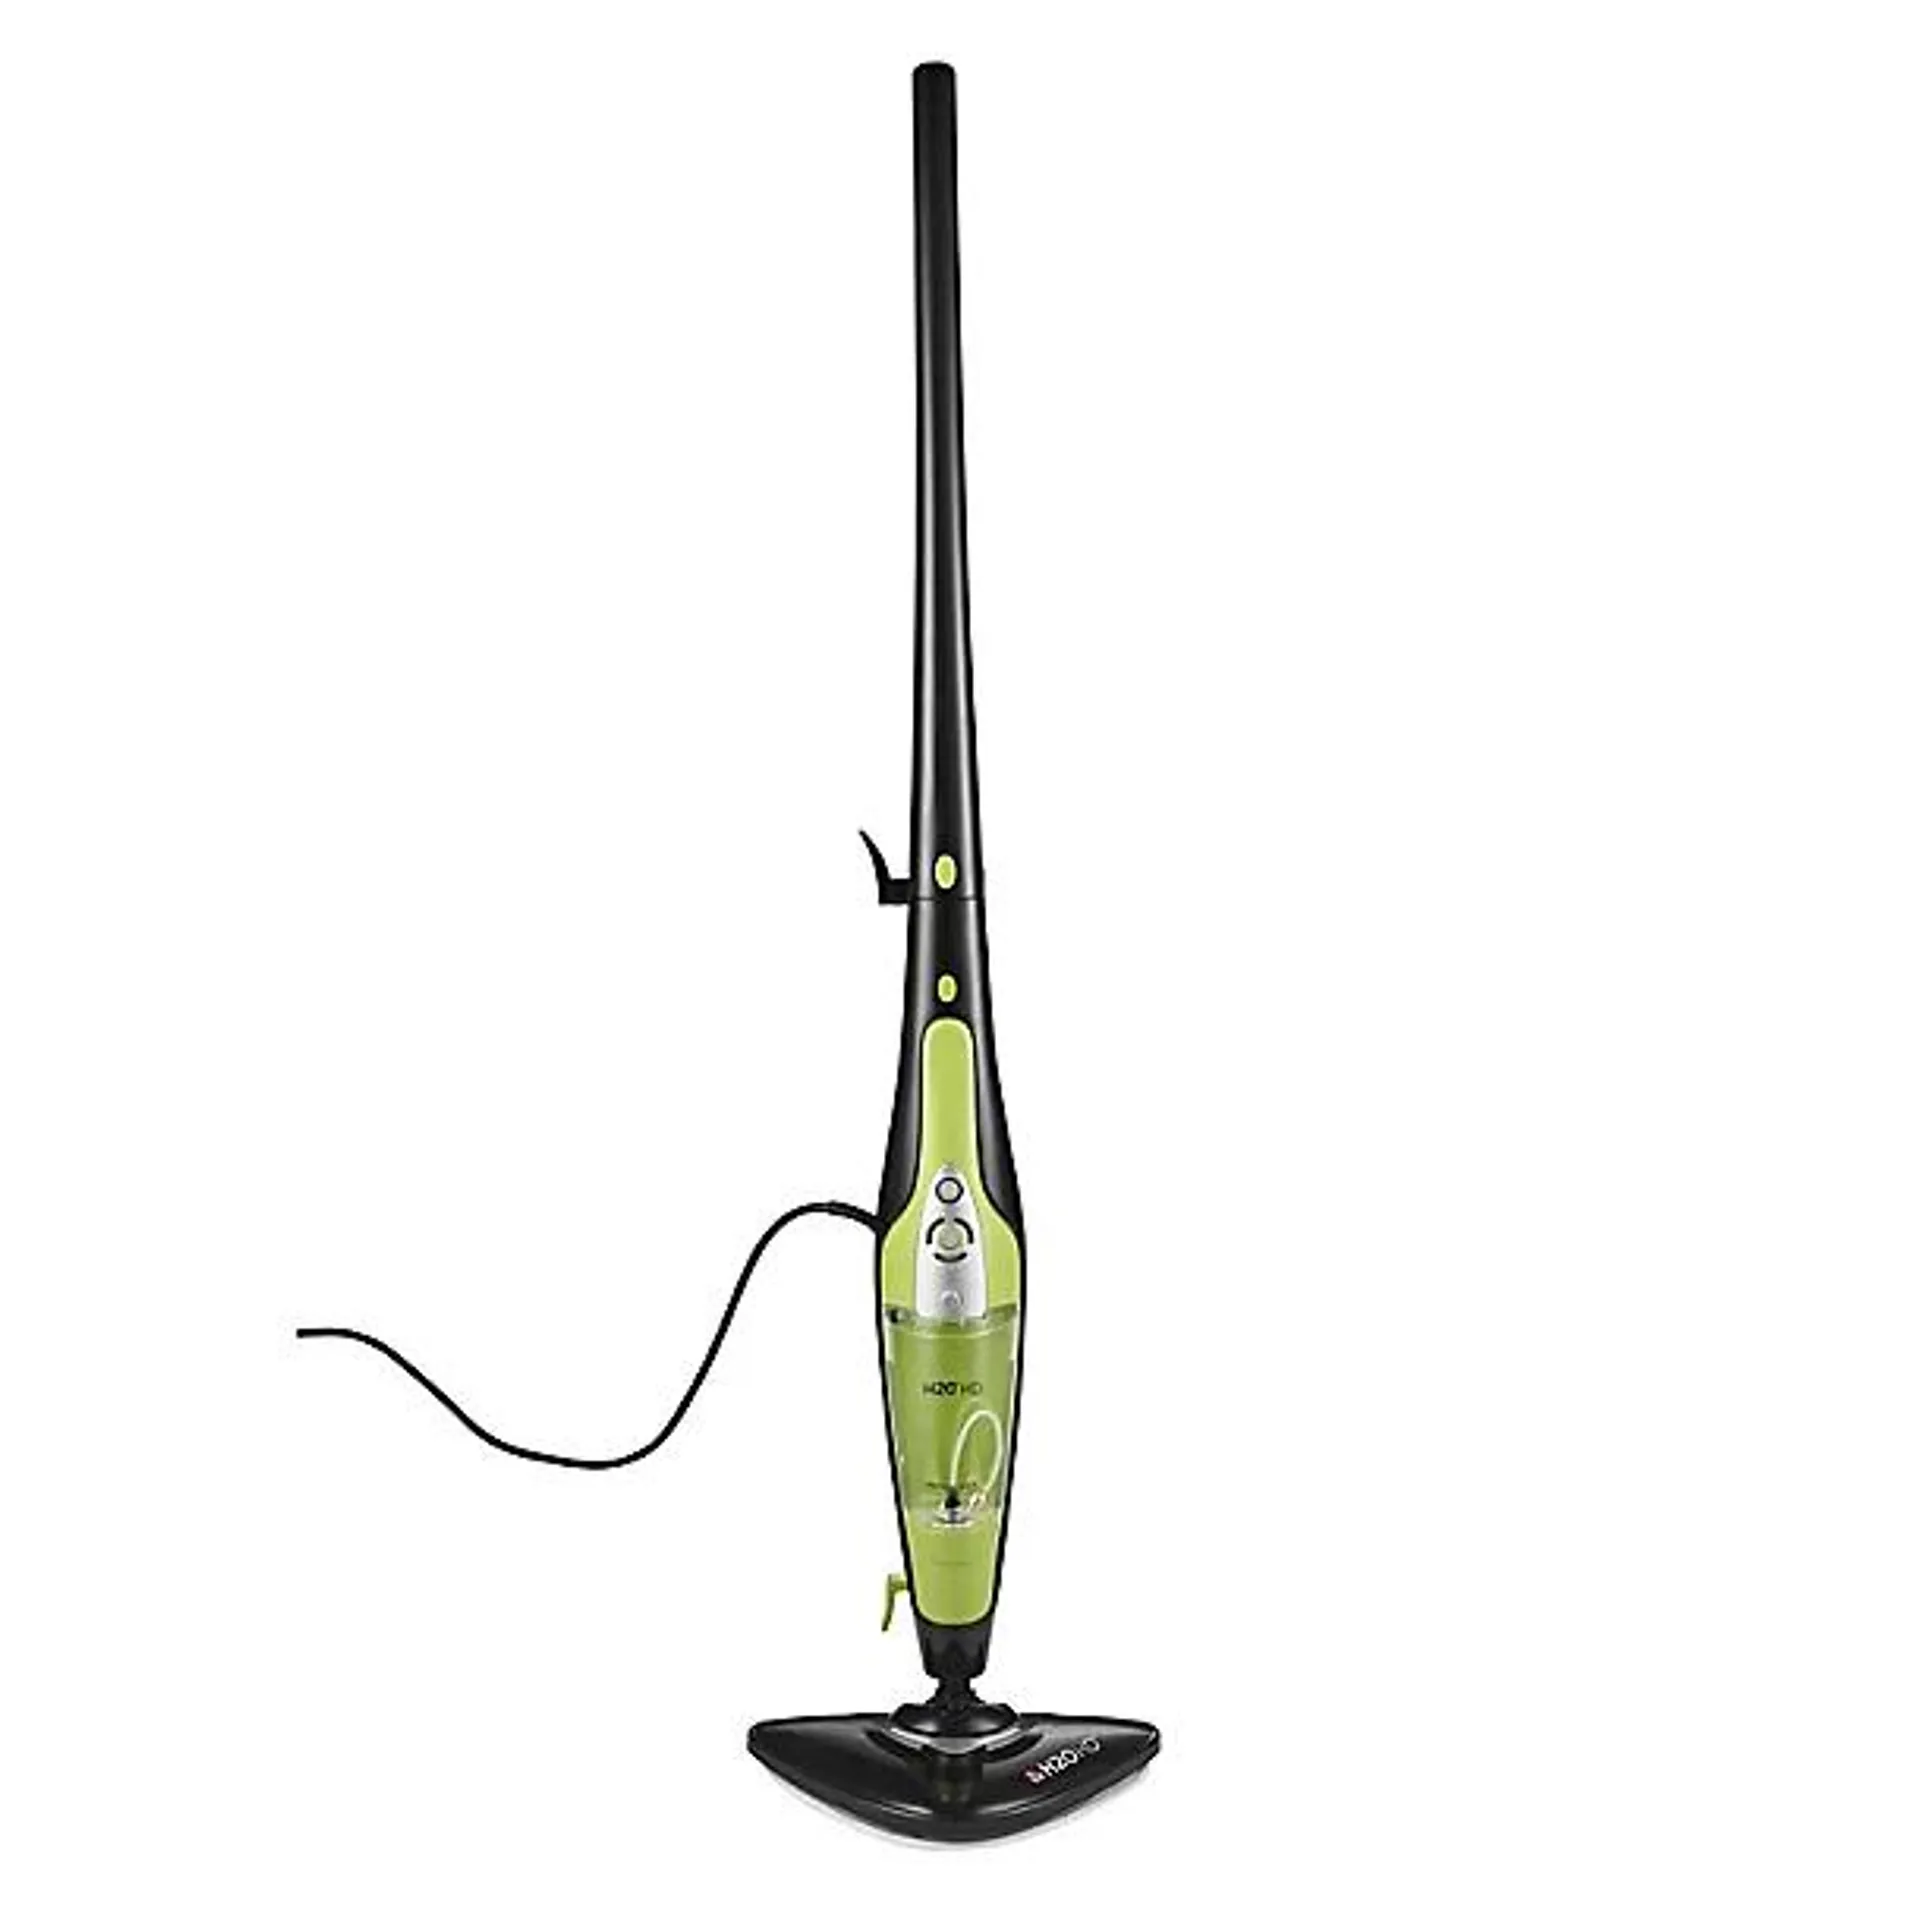 H20 HD 5-in-1 Steam Mop and Handheld Steam Cleaner System 208001UK